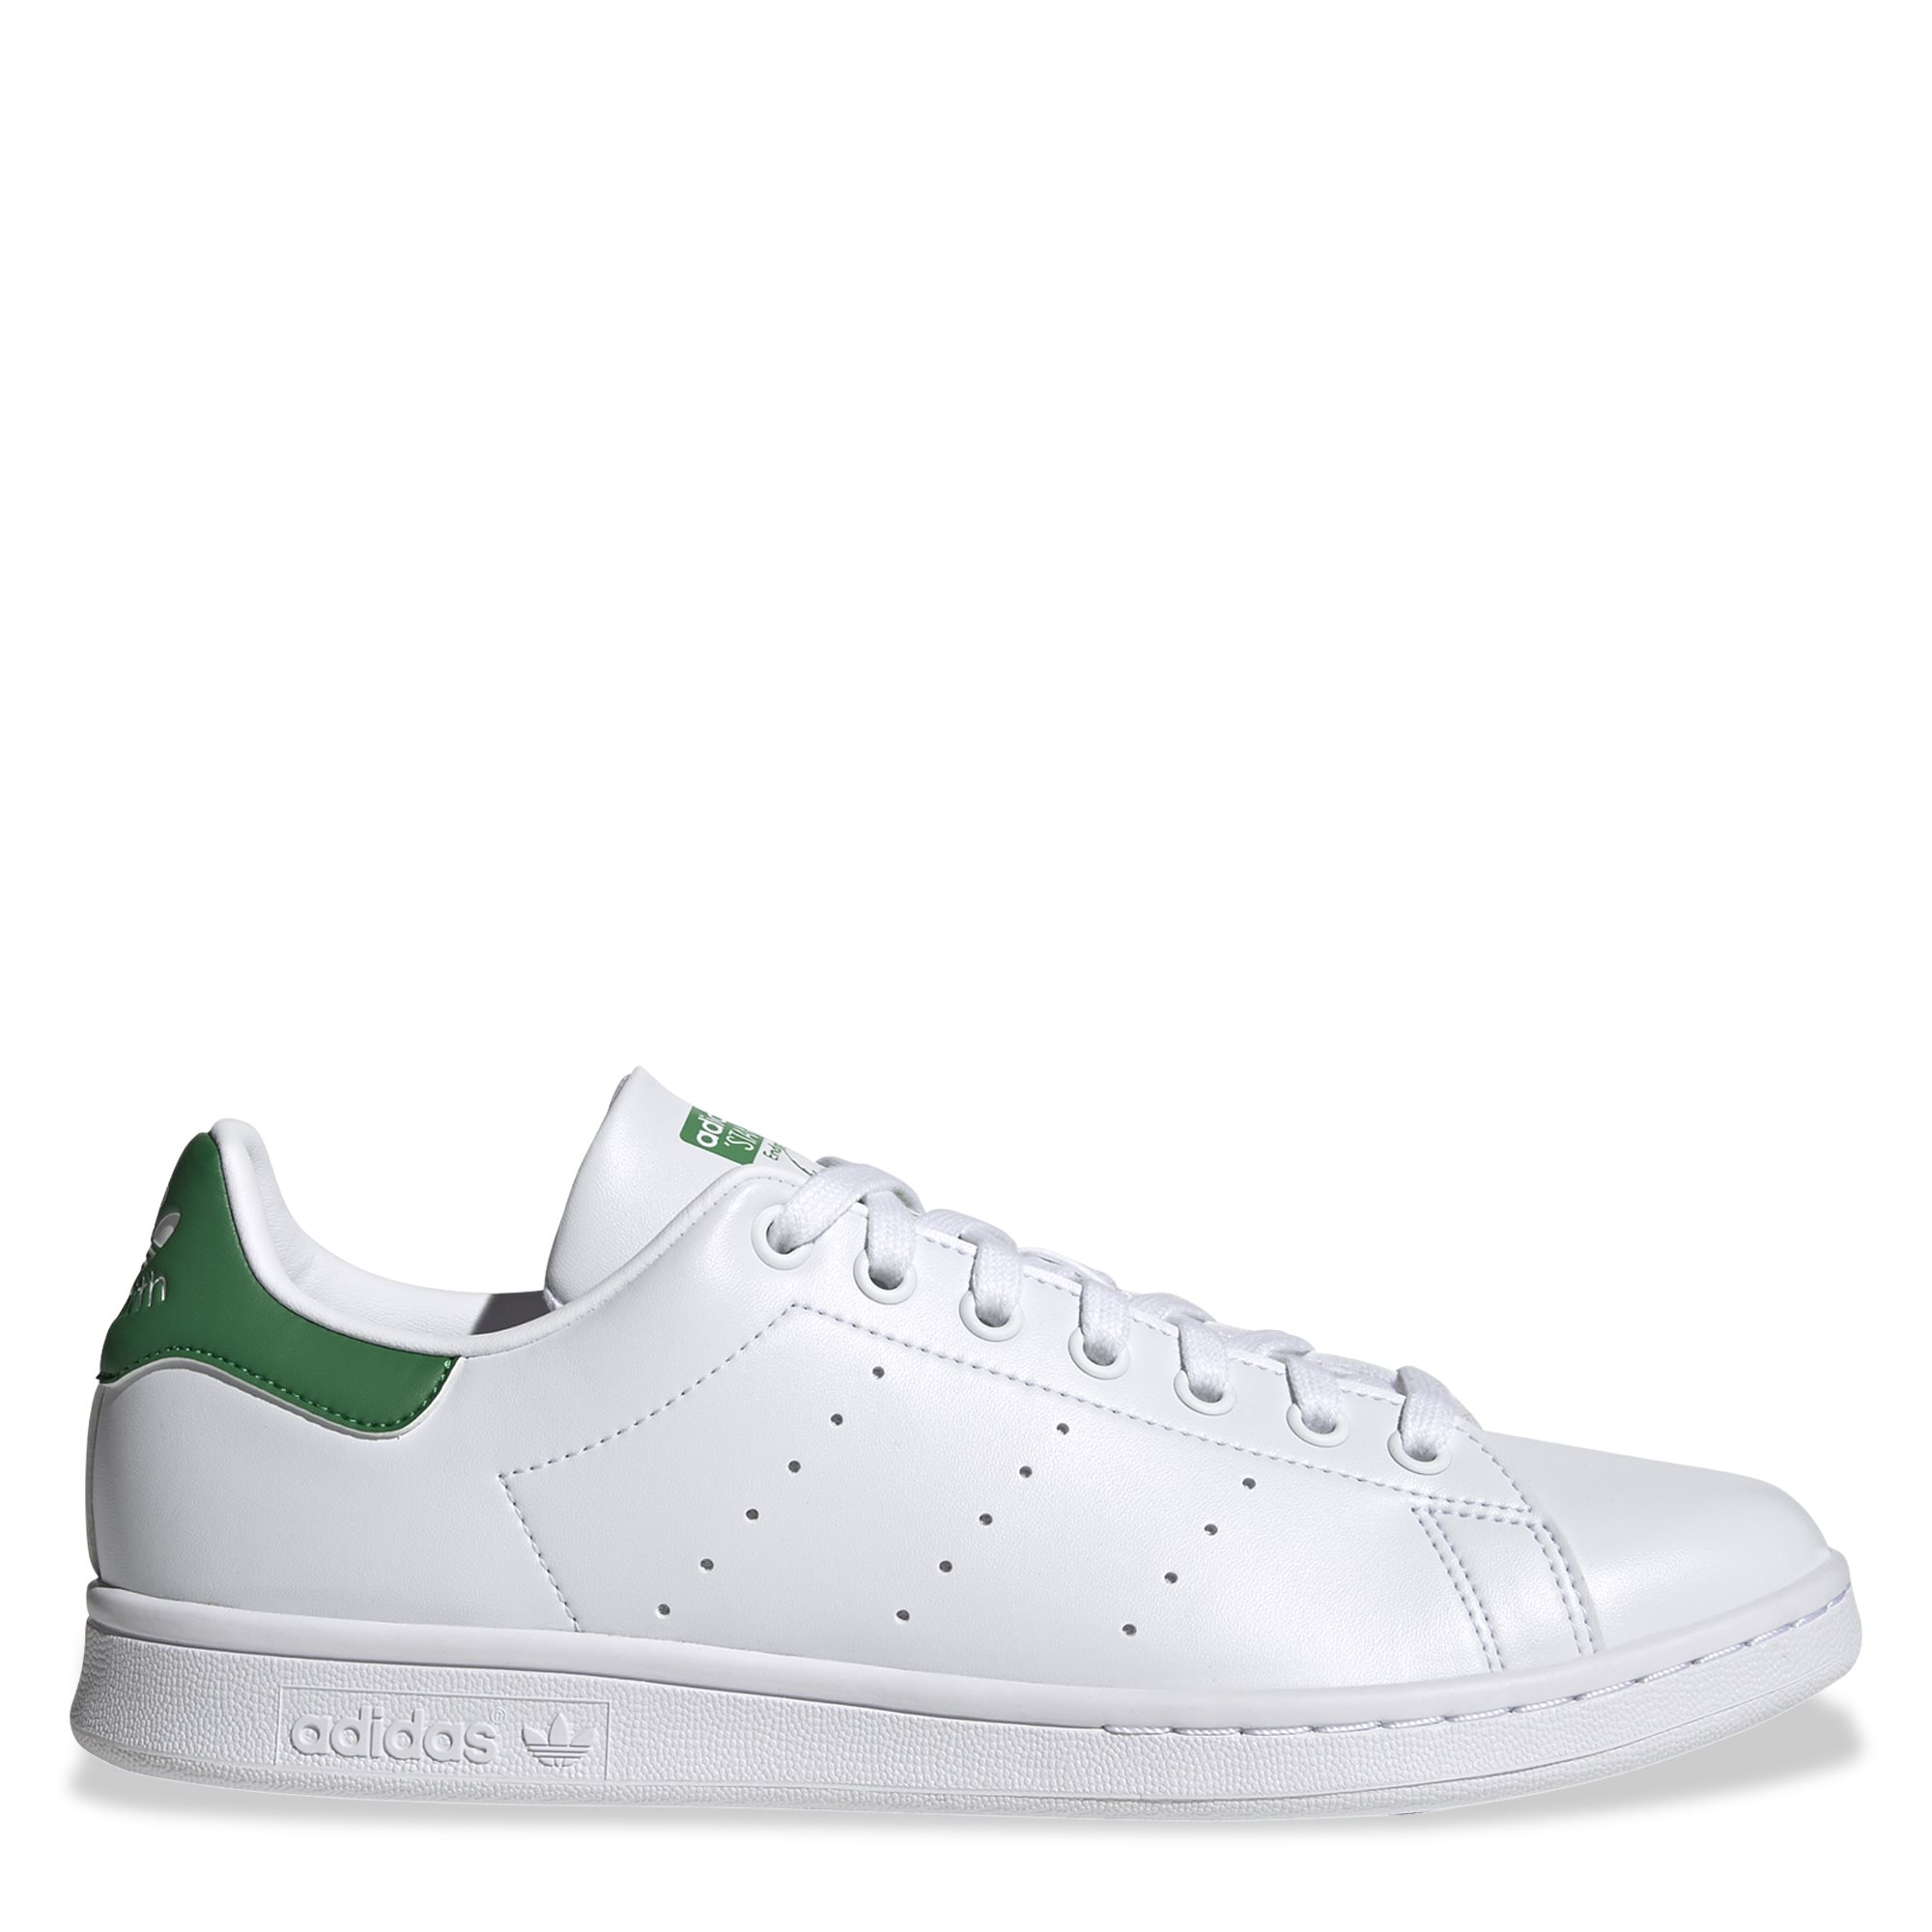 Stan Smith Sneakers - Shoes - White